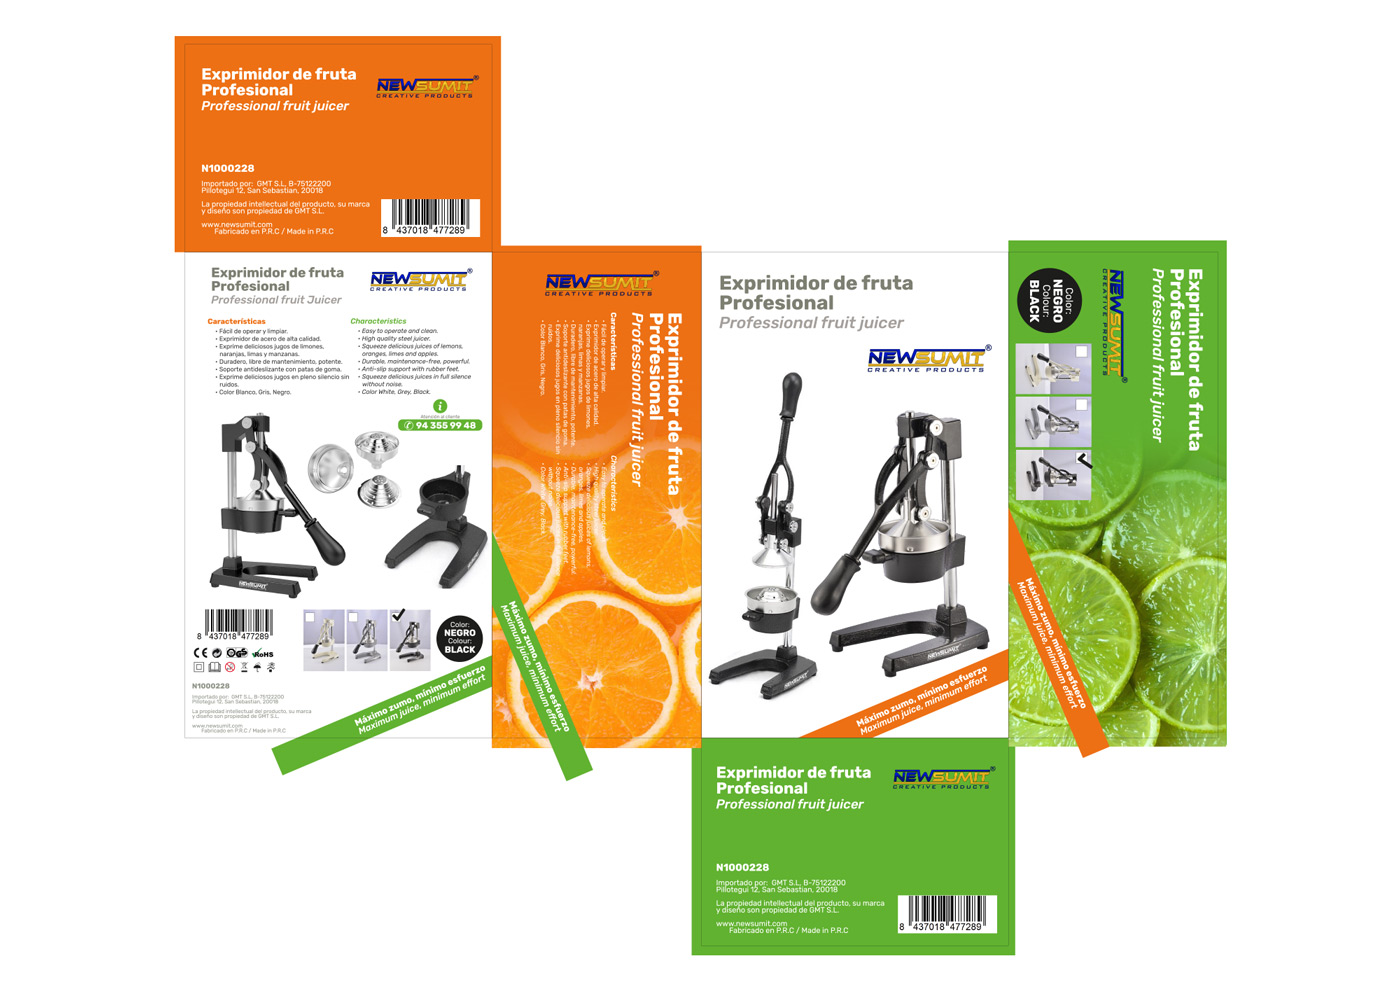 Portfolio of graphic and creative design works of boxes and packaging for a company that produces professional juicers